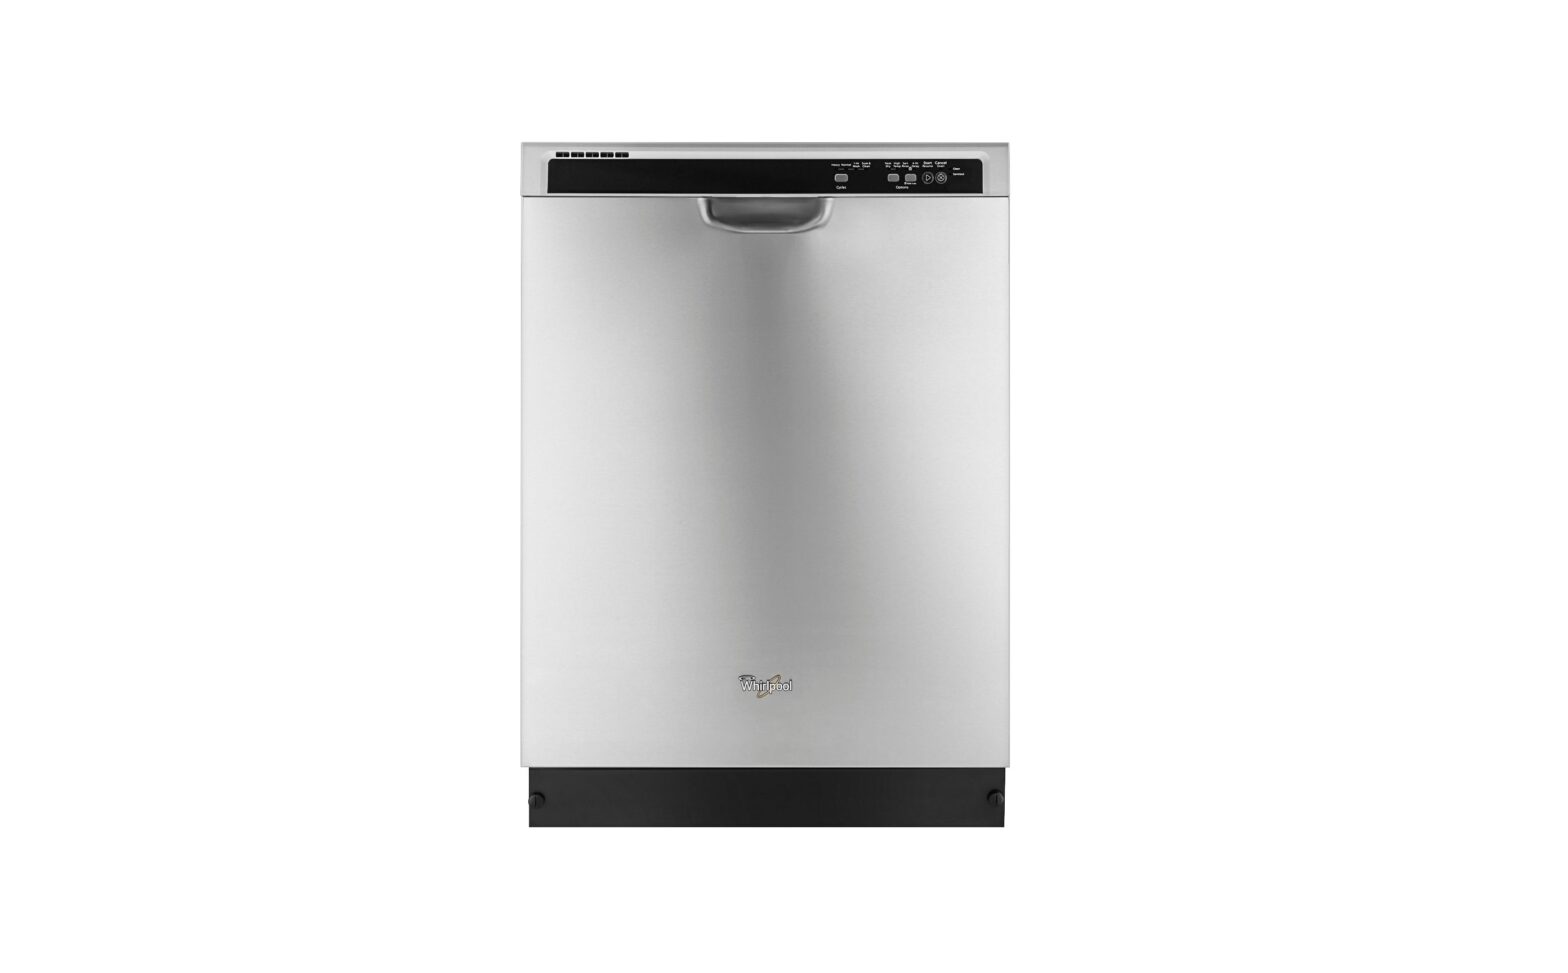 Whirlpool 24 Inches Built In Dishwasher Owner’s Manual